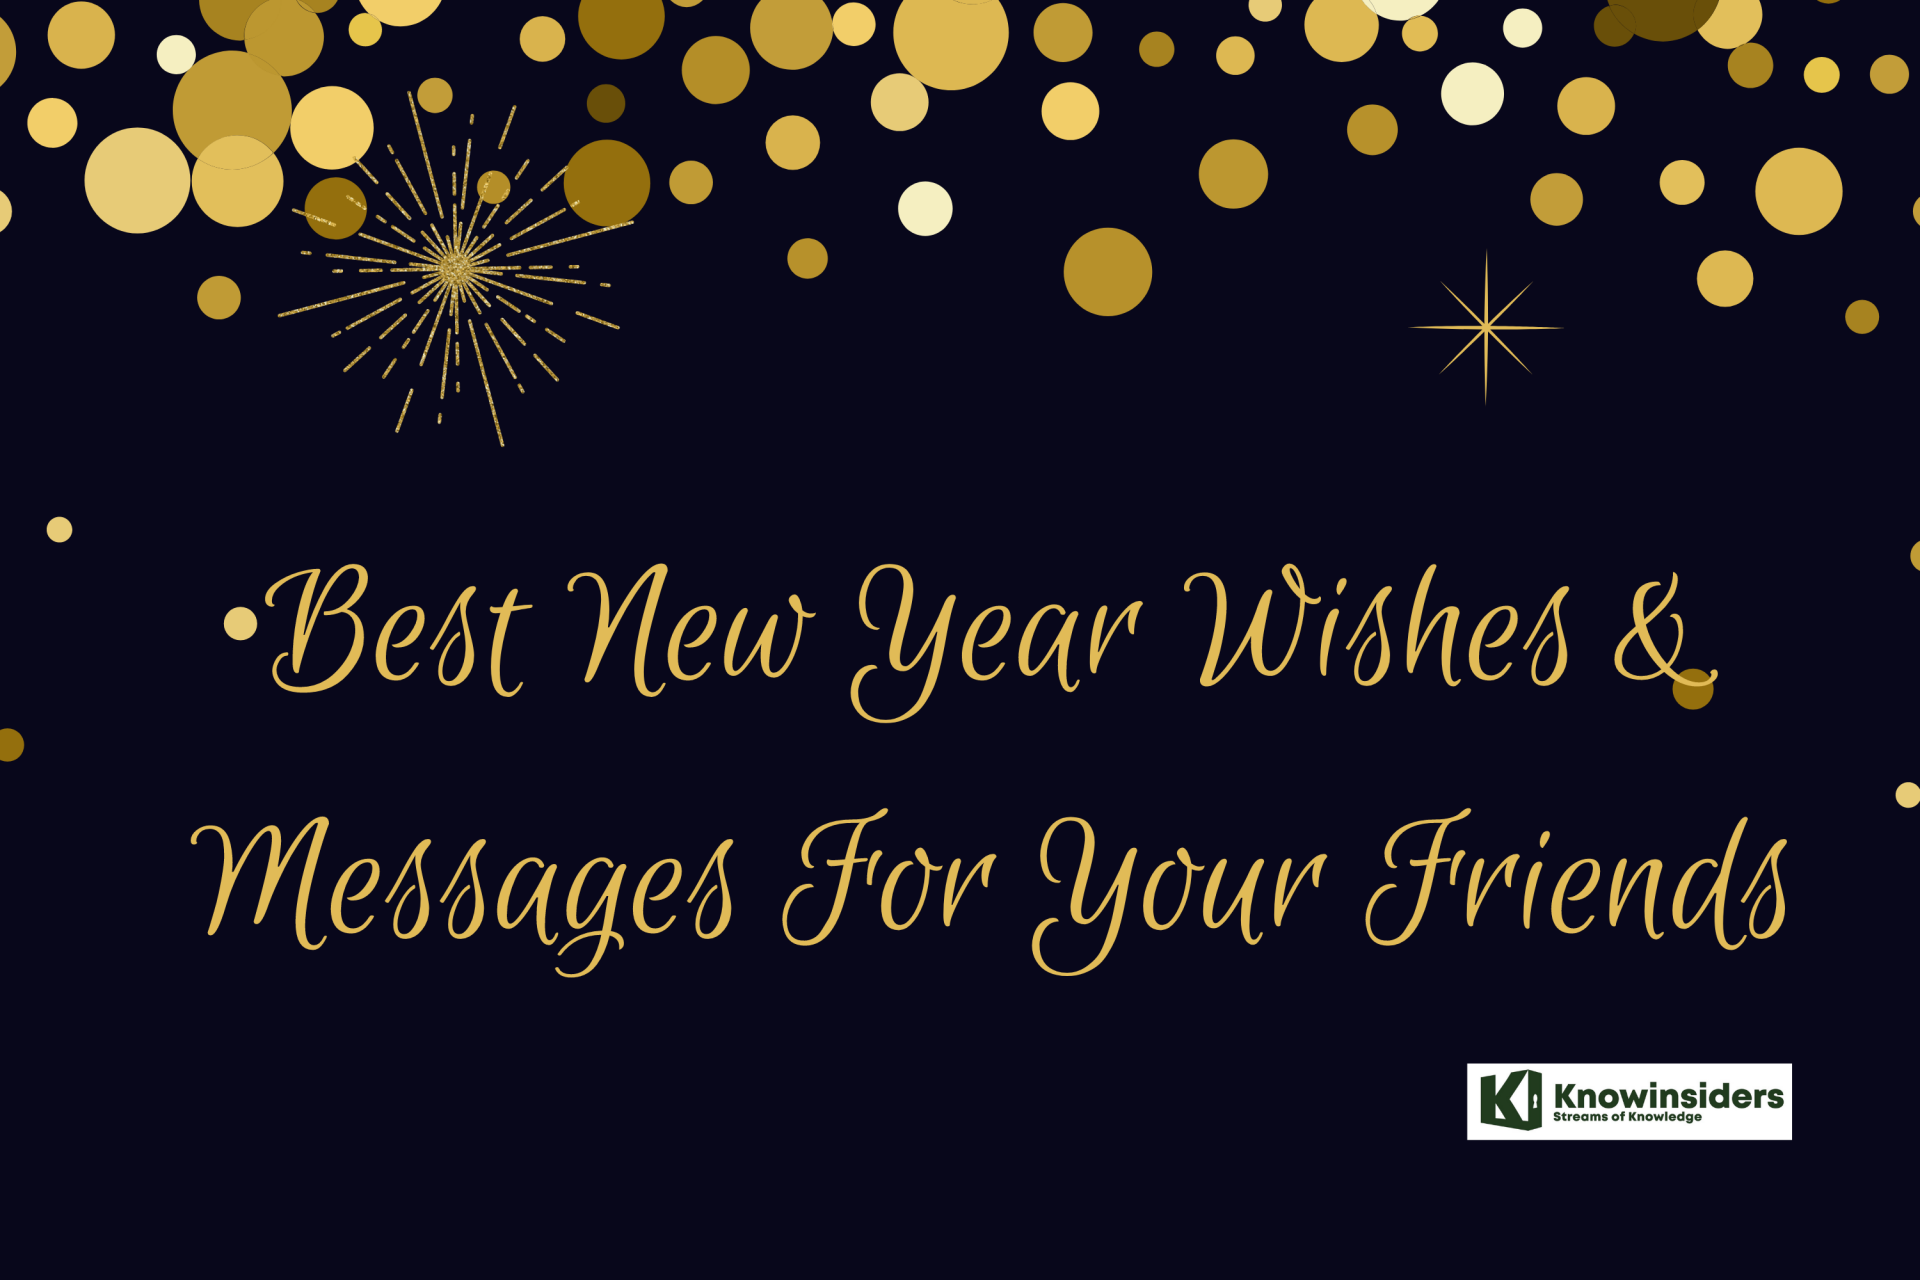 100+ Best New Year Wishes & Messages For Friends